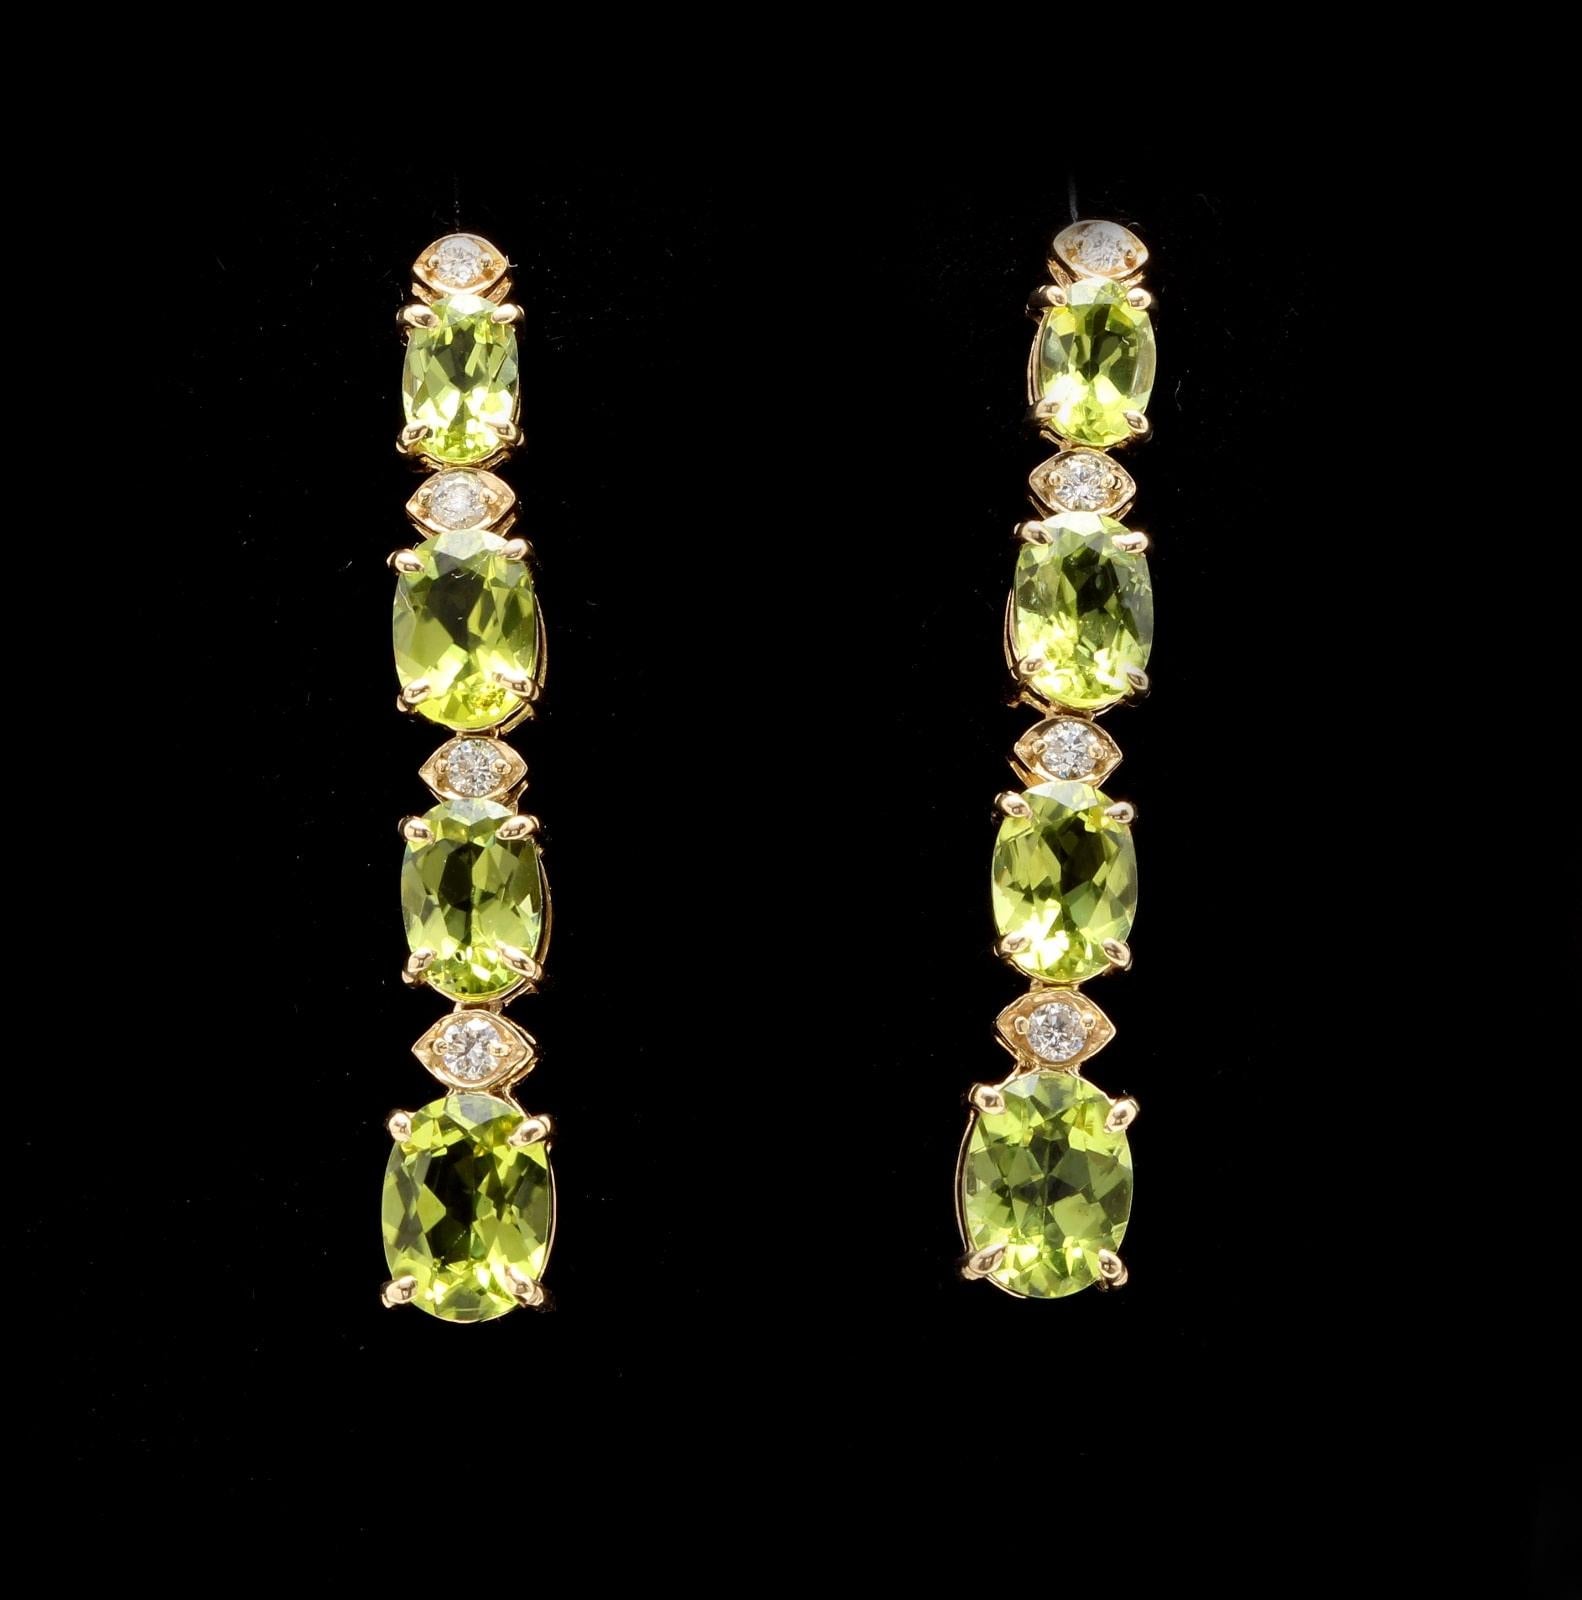 9.40 Carats Natural Peridot and Diamond 14K Solid Yellow Gold Earrings

Amazing looking piece!

Total Natural Round Cut White Diamonds Weight: Approx. 0.40 Carats (color G-H / Clarity SI1-SI2)

Total Natural Oval Cut Peridots Weight: 9.00